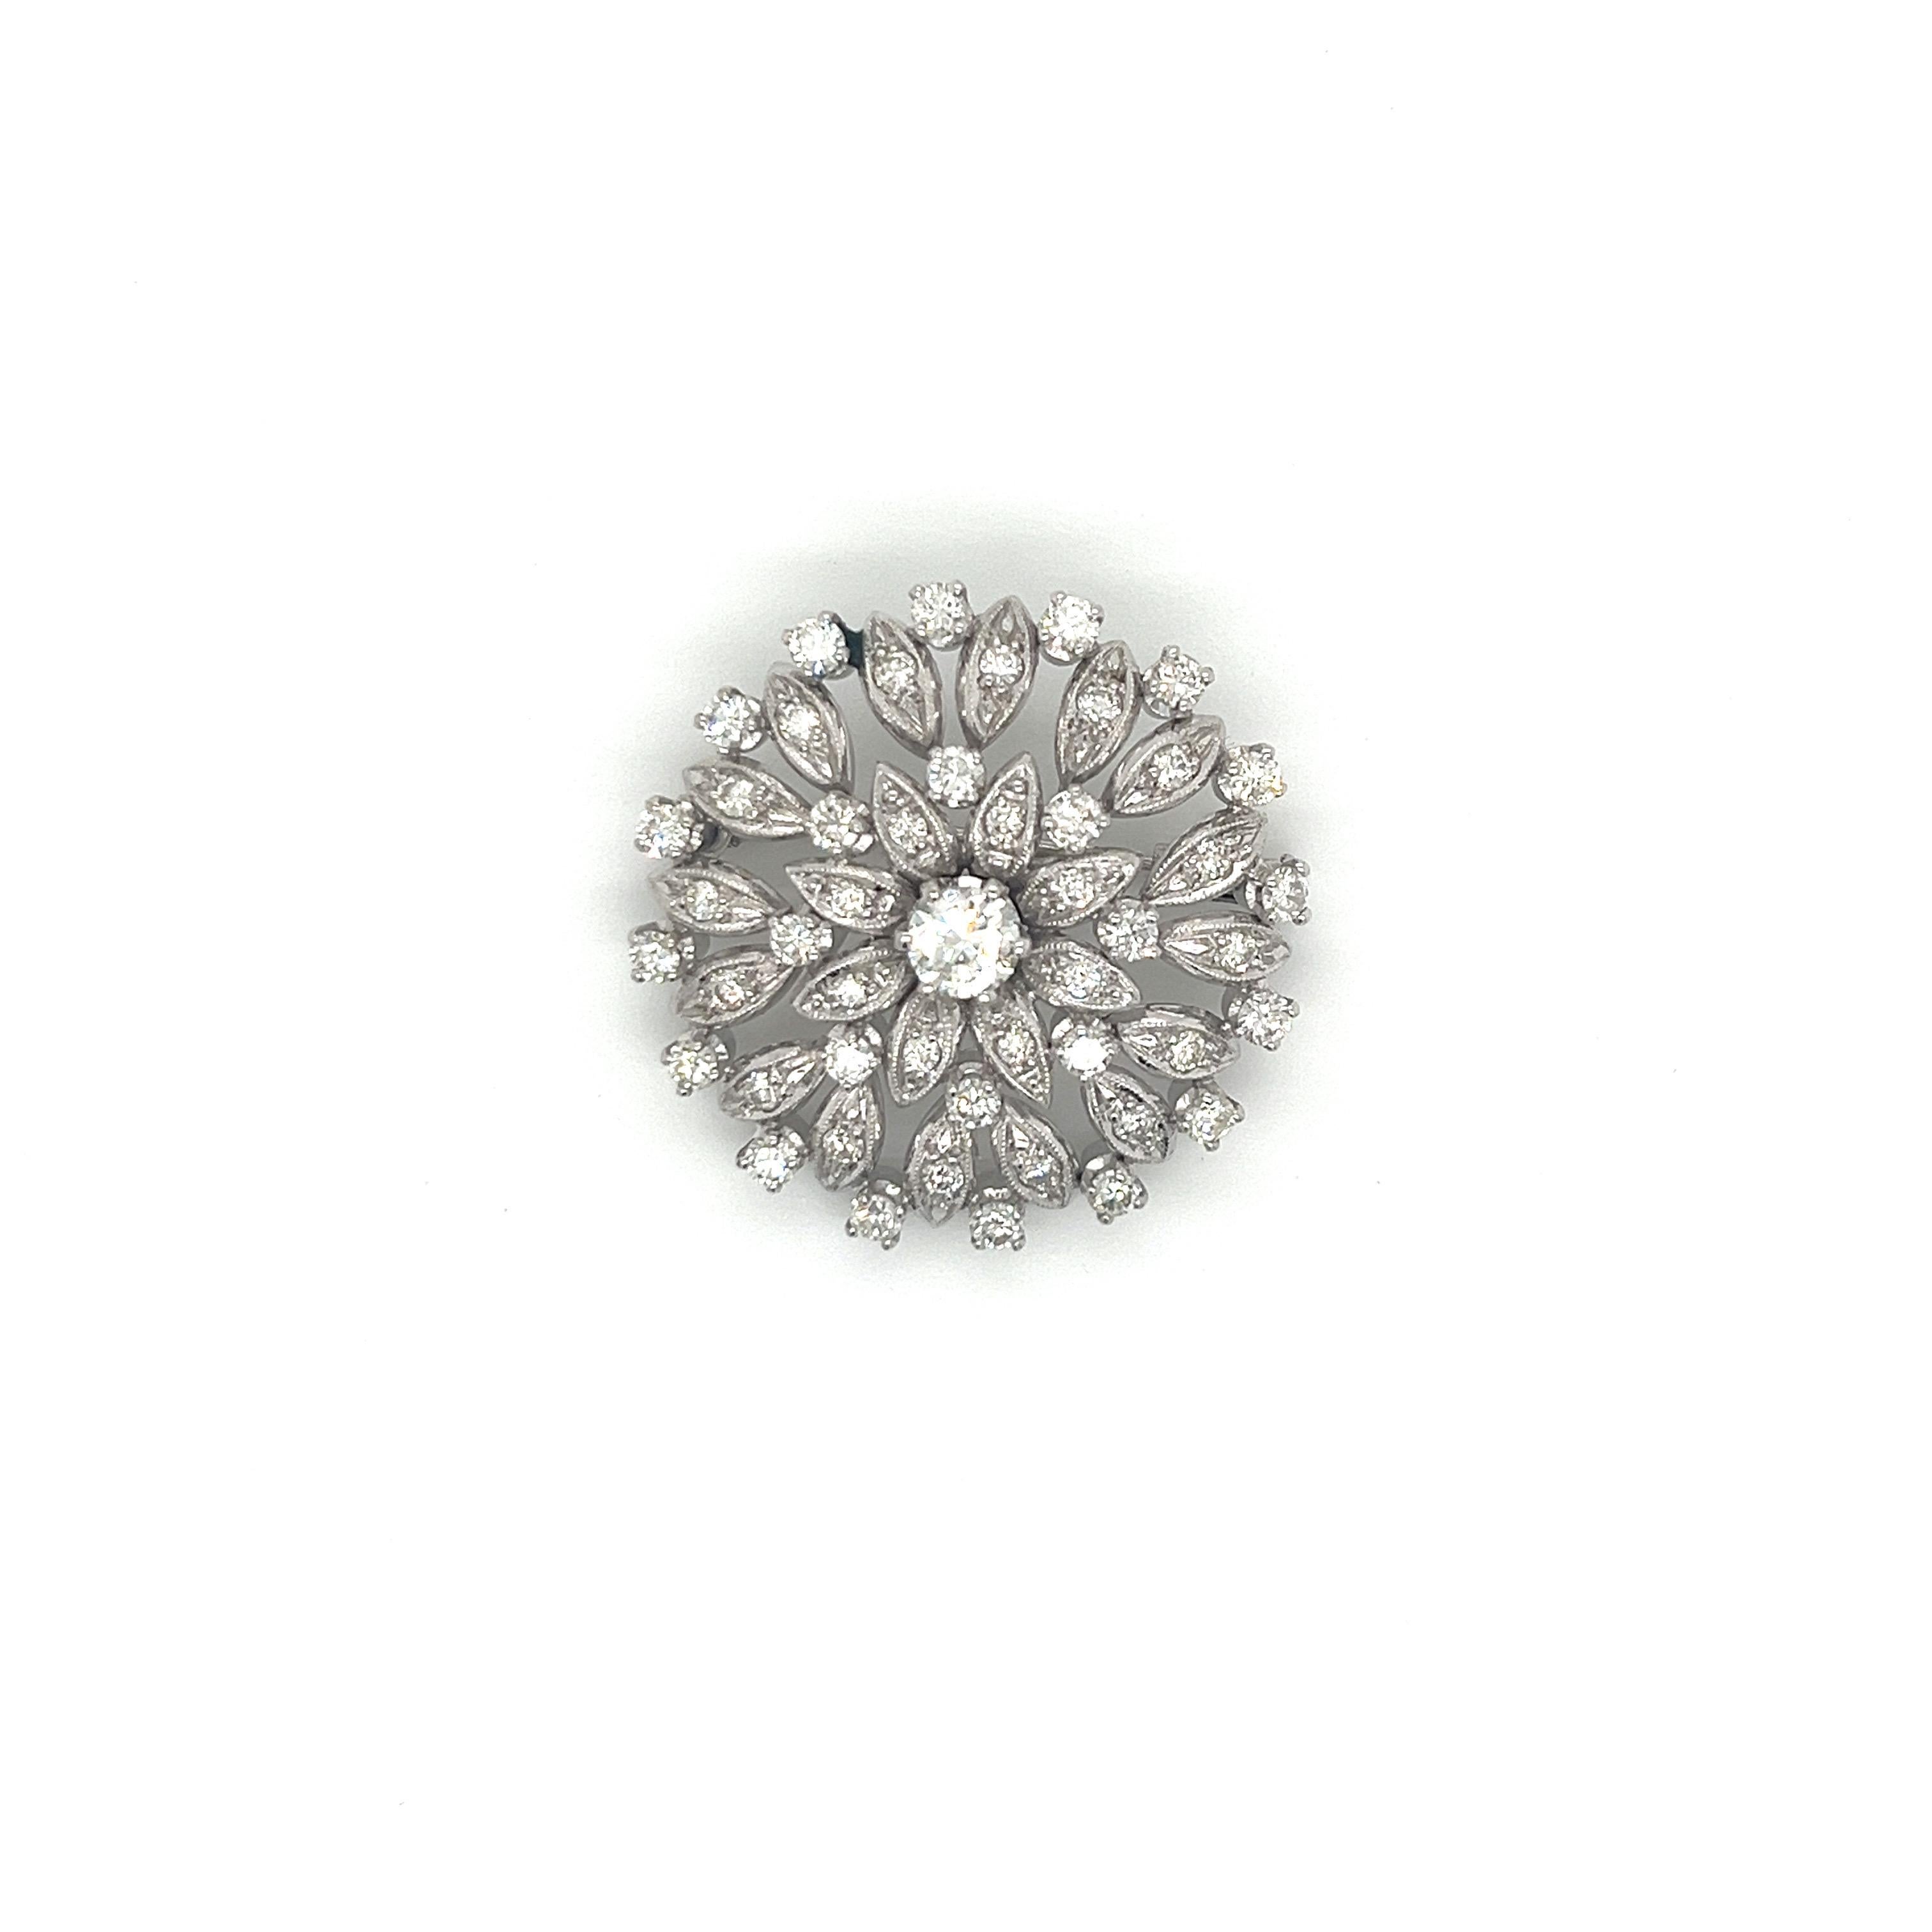 This exquisite vintage brooch from the 1960s is a true representation of timeless elegance. Crafted in luxurious 18k white gold, the piece showcases a breathtaking floral design adorned with dazzling diamonds.

At the heart of this brooch sits a